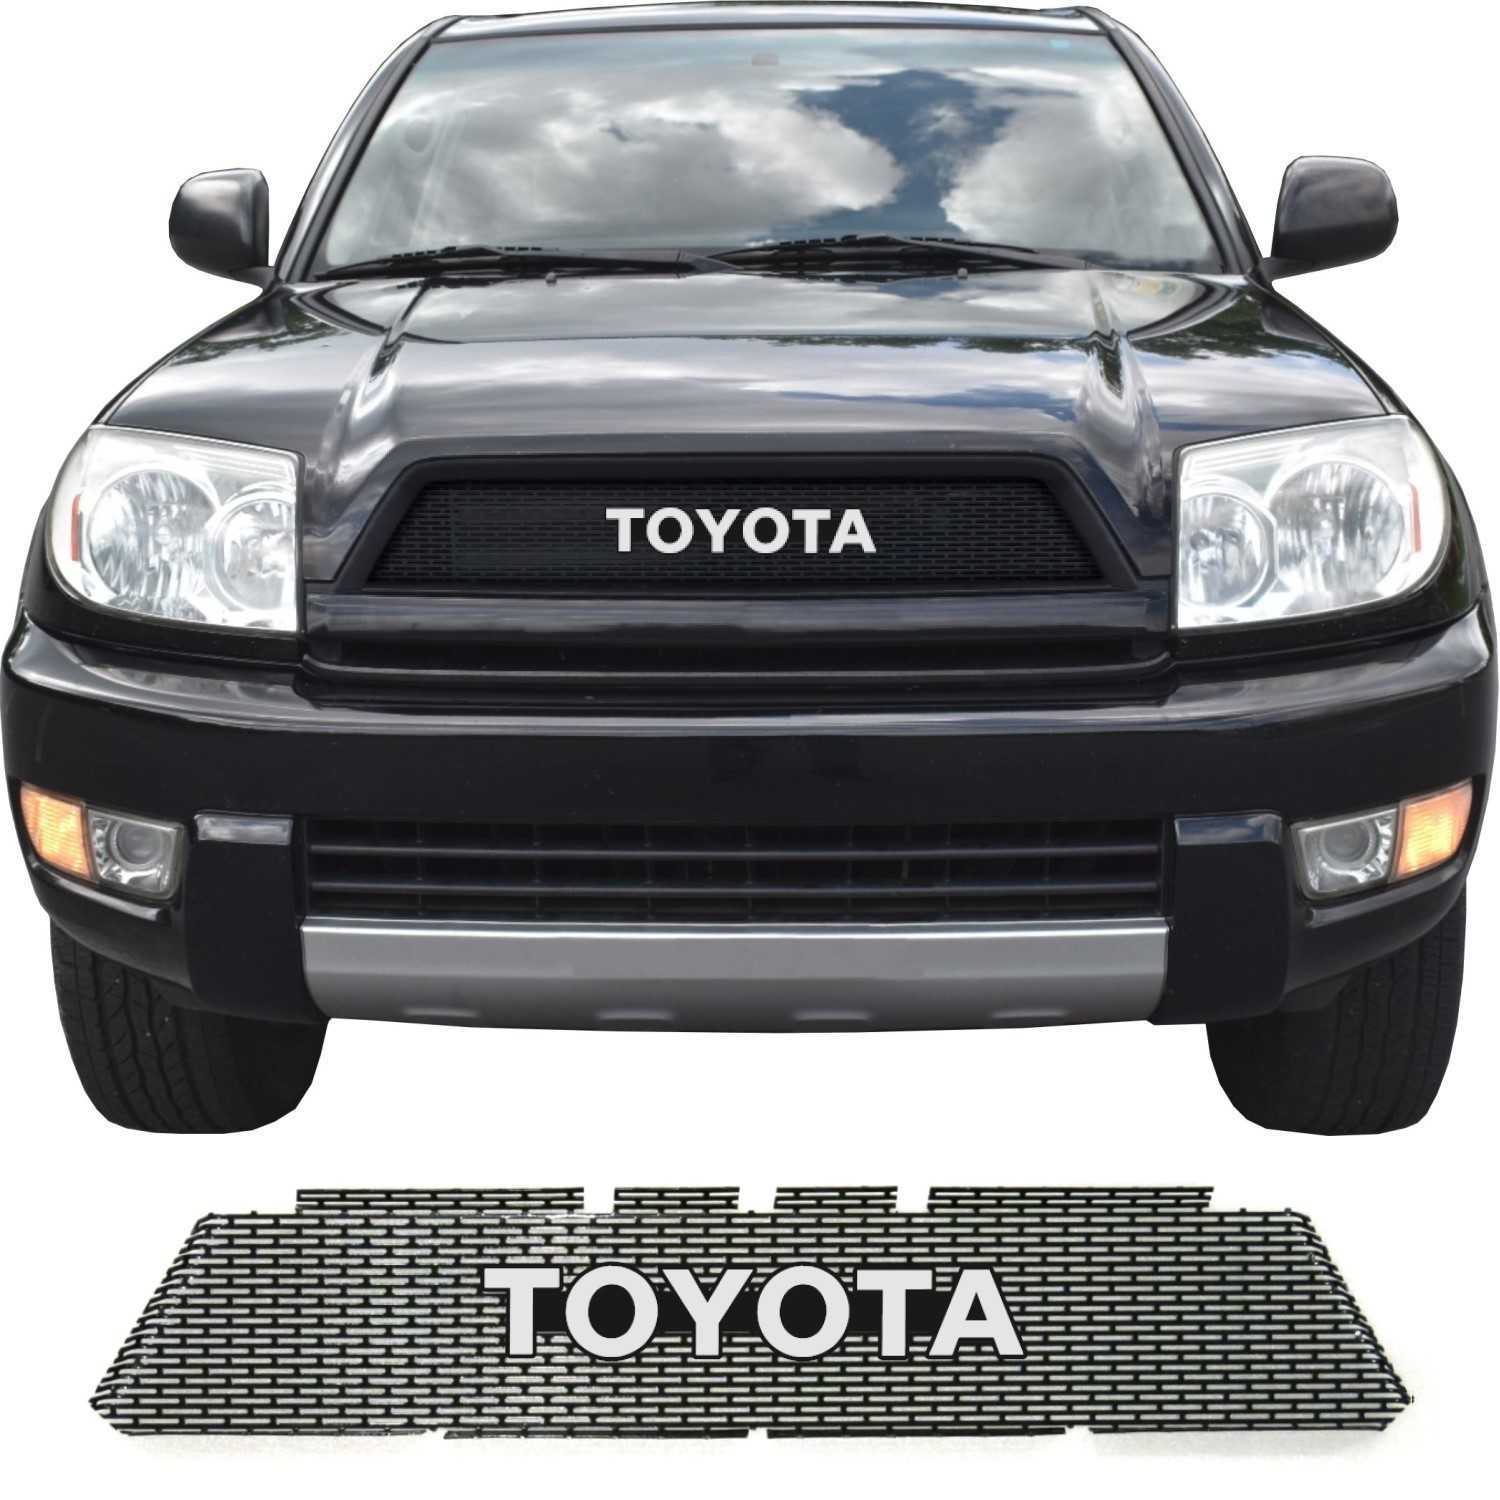 2003 - 2005 Toyota 4Runner Grill Mesh with Toyota Emblem